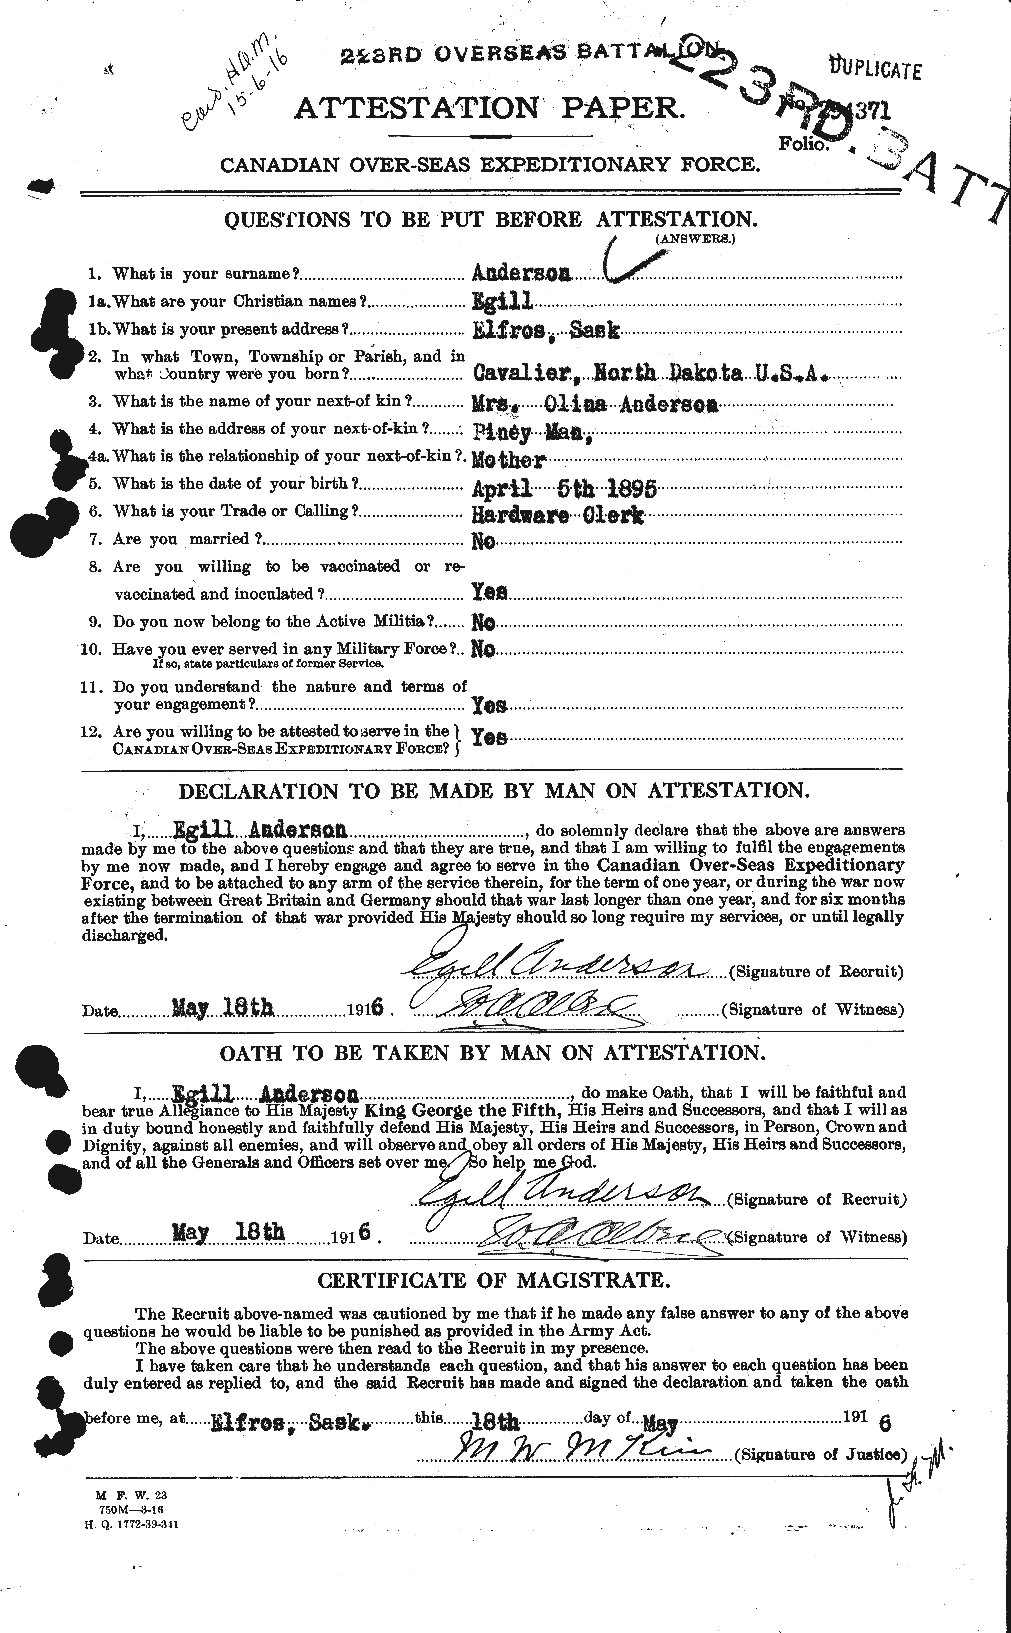 Personnel Records of the First World War - CEF 209924a